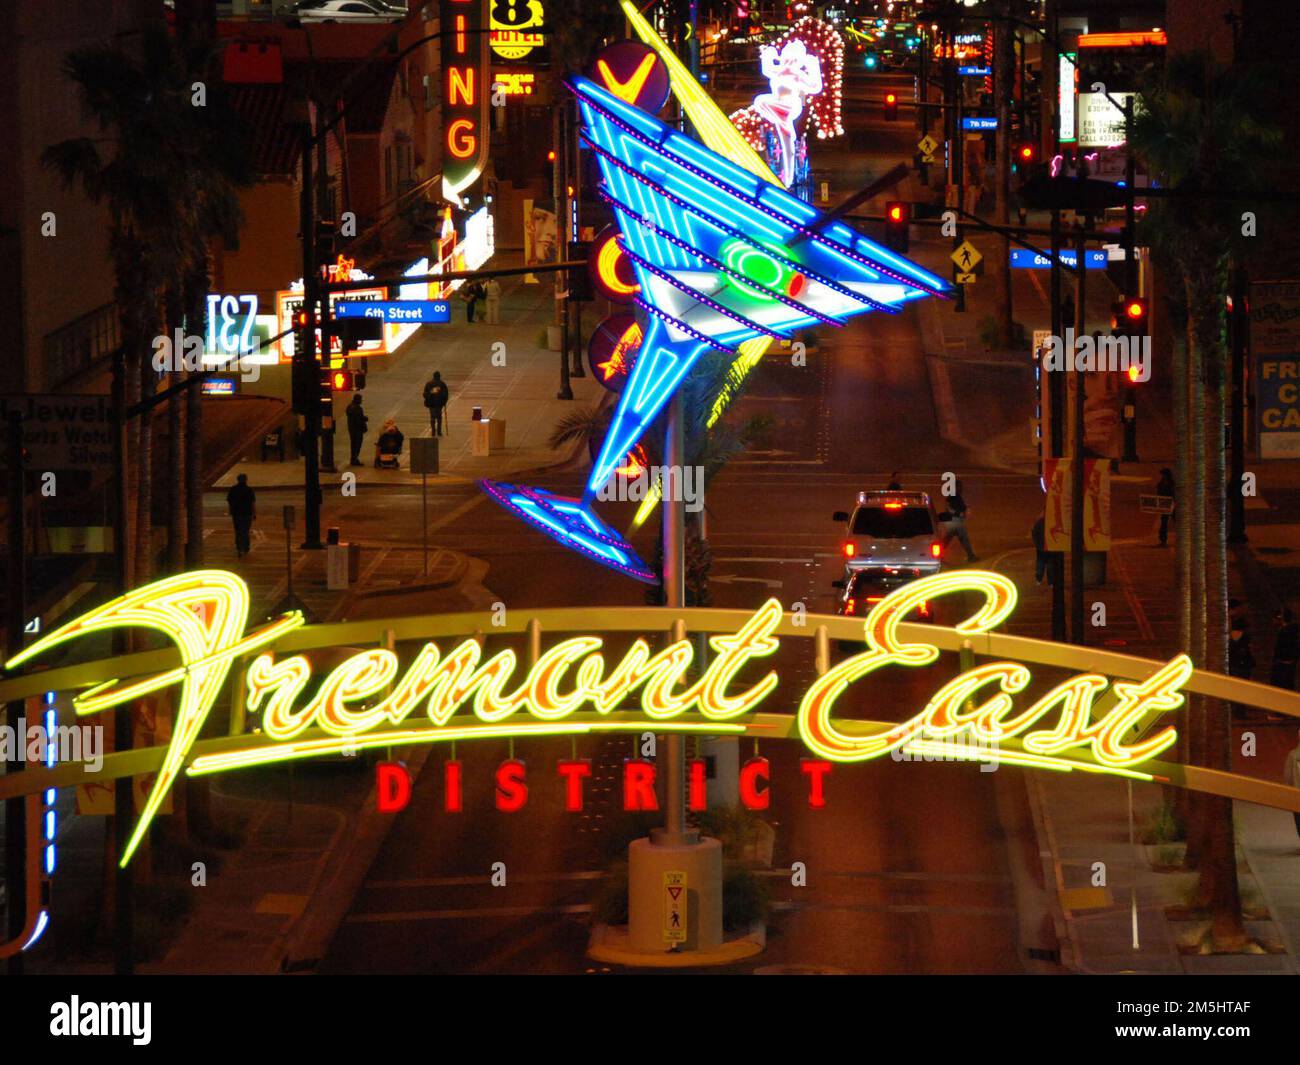 City of Las Vegas, Las Vegas Boulevard State Scenic Byway - Entrance to Fremont East Entertainment District. The entrance to the Fremont East Entertainment District welcomes visitors with a bright display of colorful neon lights, contrasting with the dark of the night. Location: Las Vegas, Nevada (36.170° N 115.142° W) Stock Photo